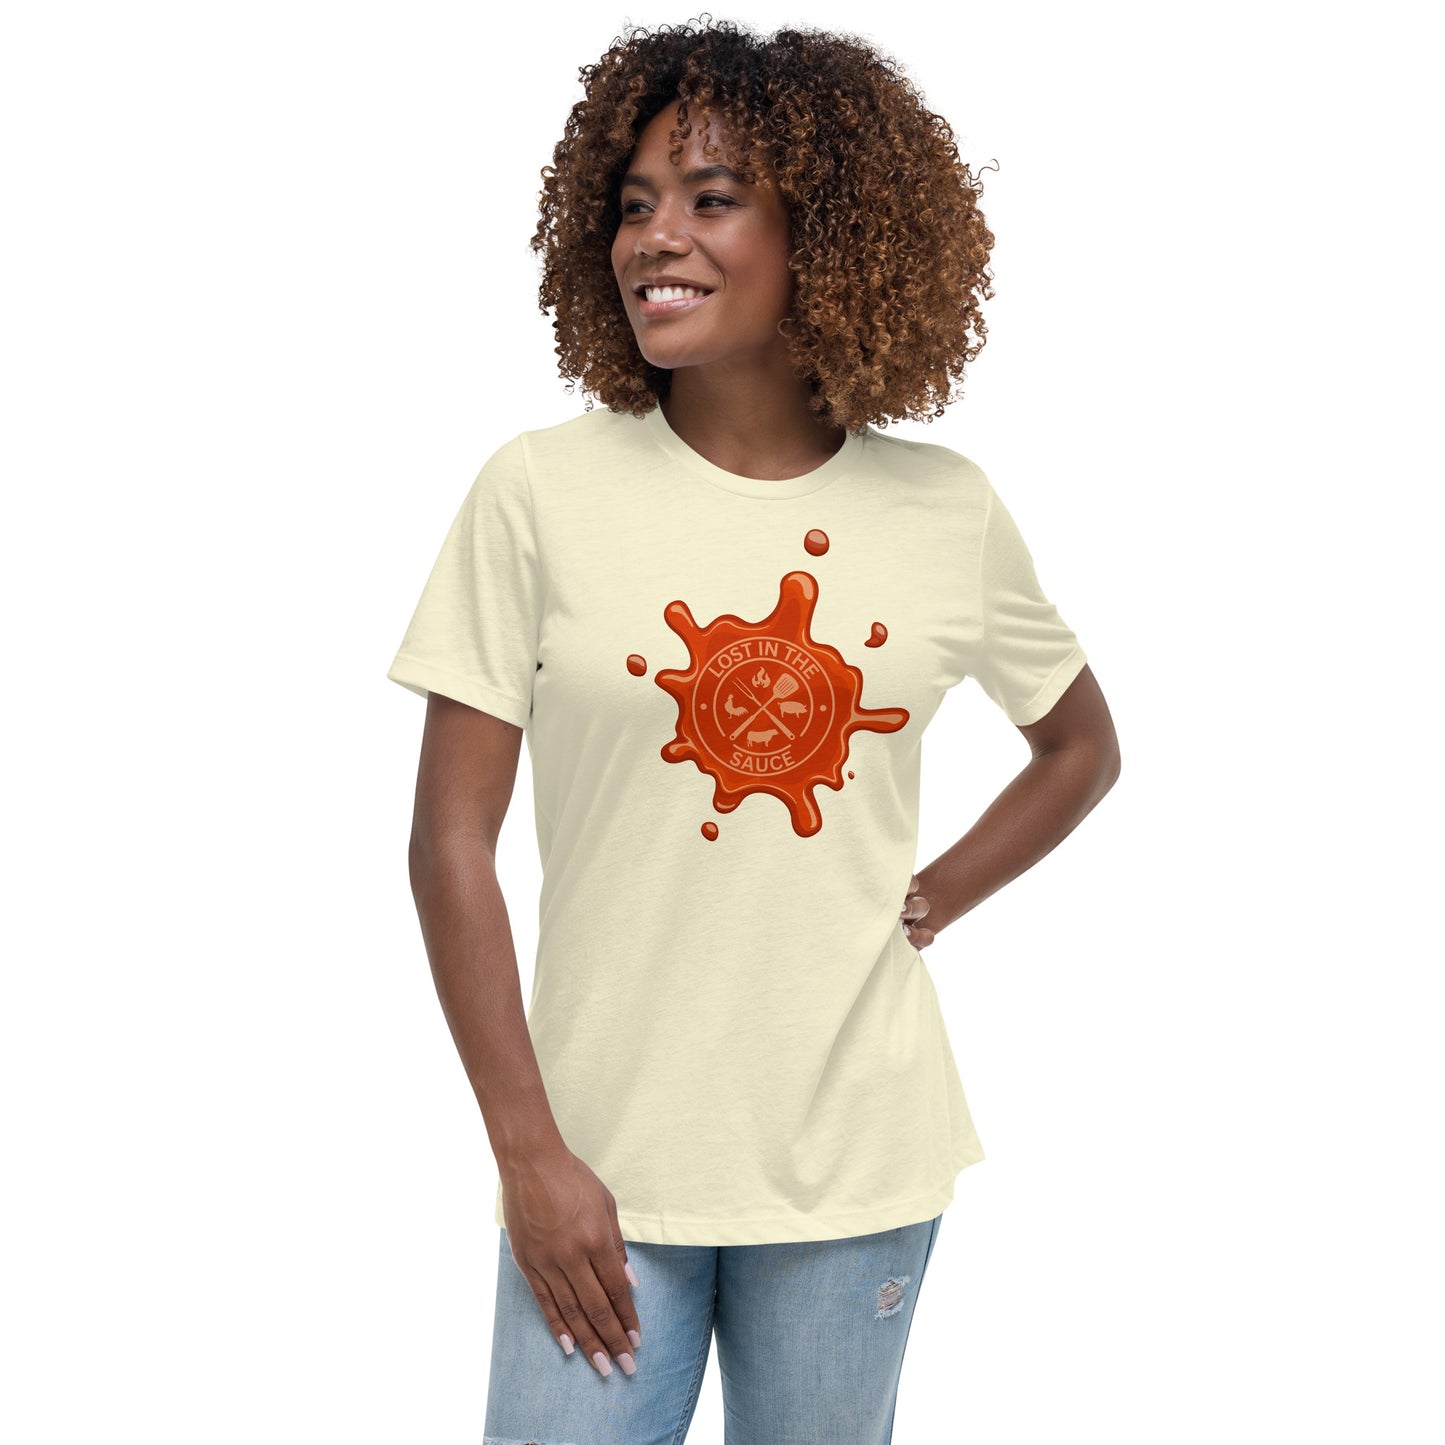 LOST IN THE SAUCE (BBQ) Women's Relaxed T-Shirt